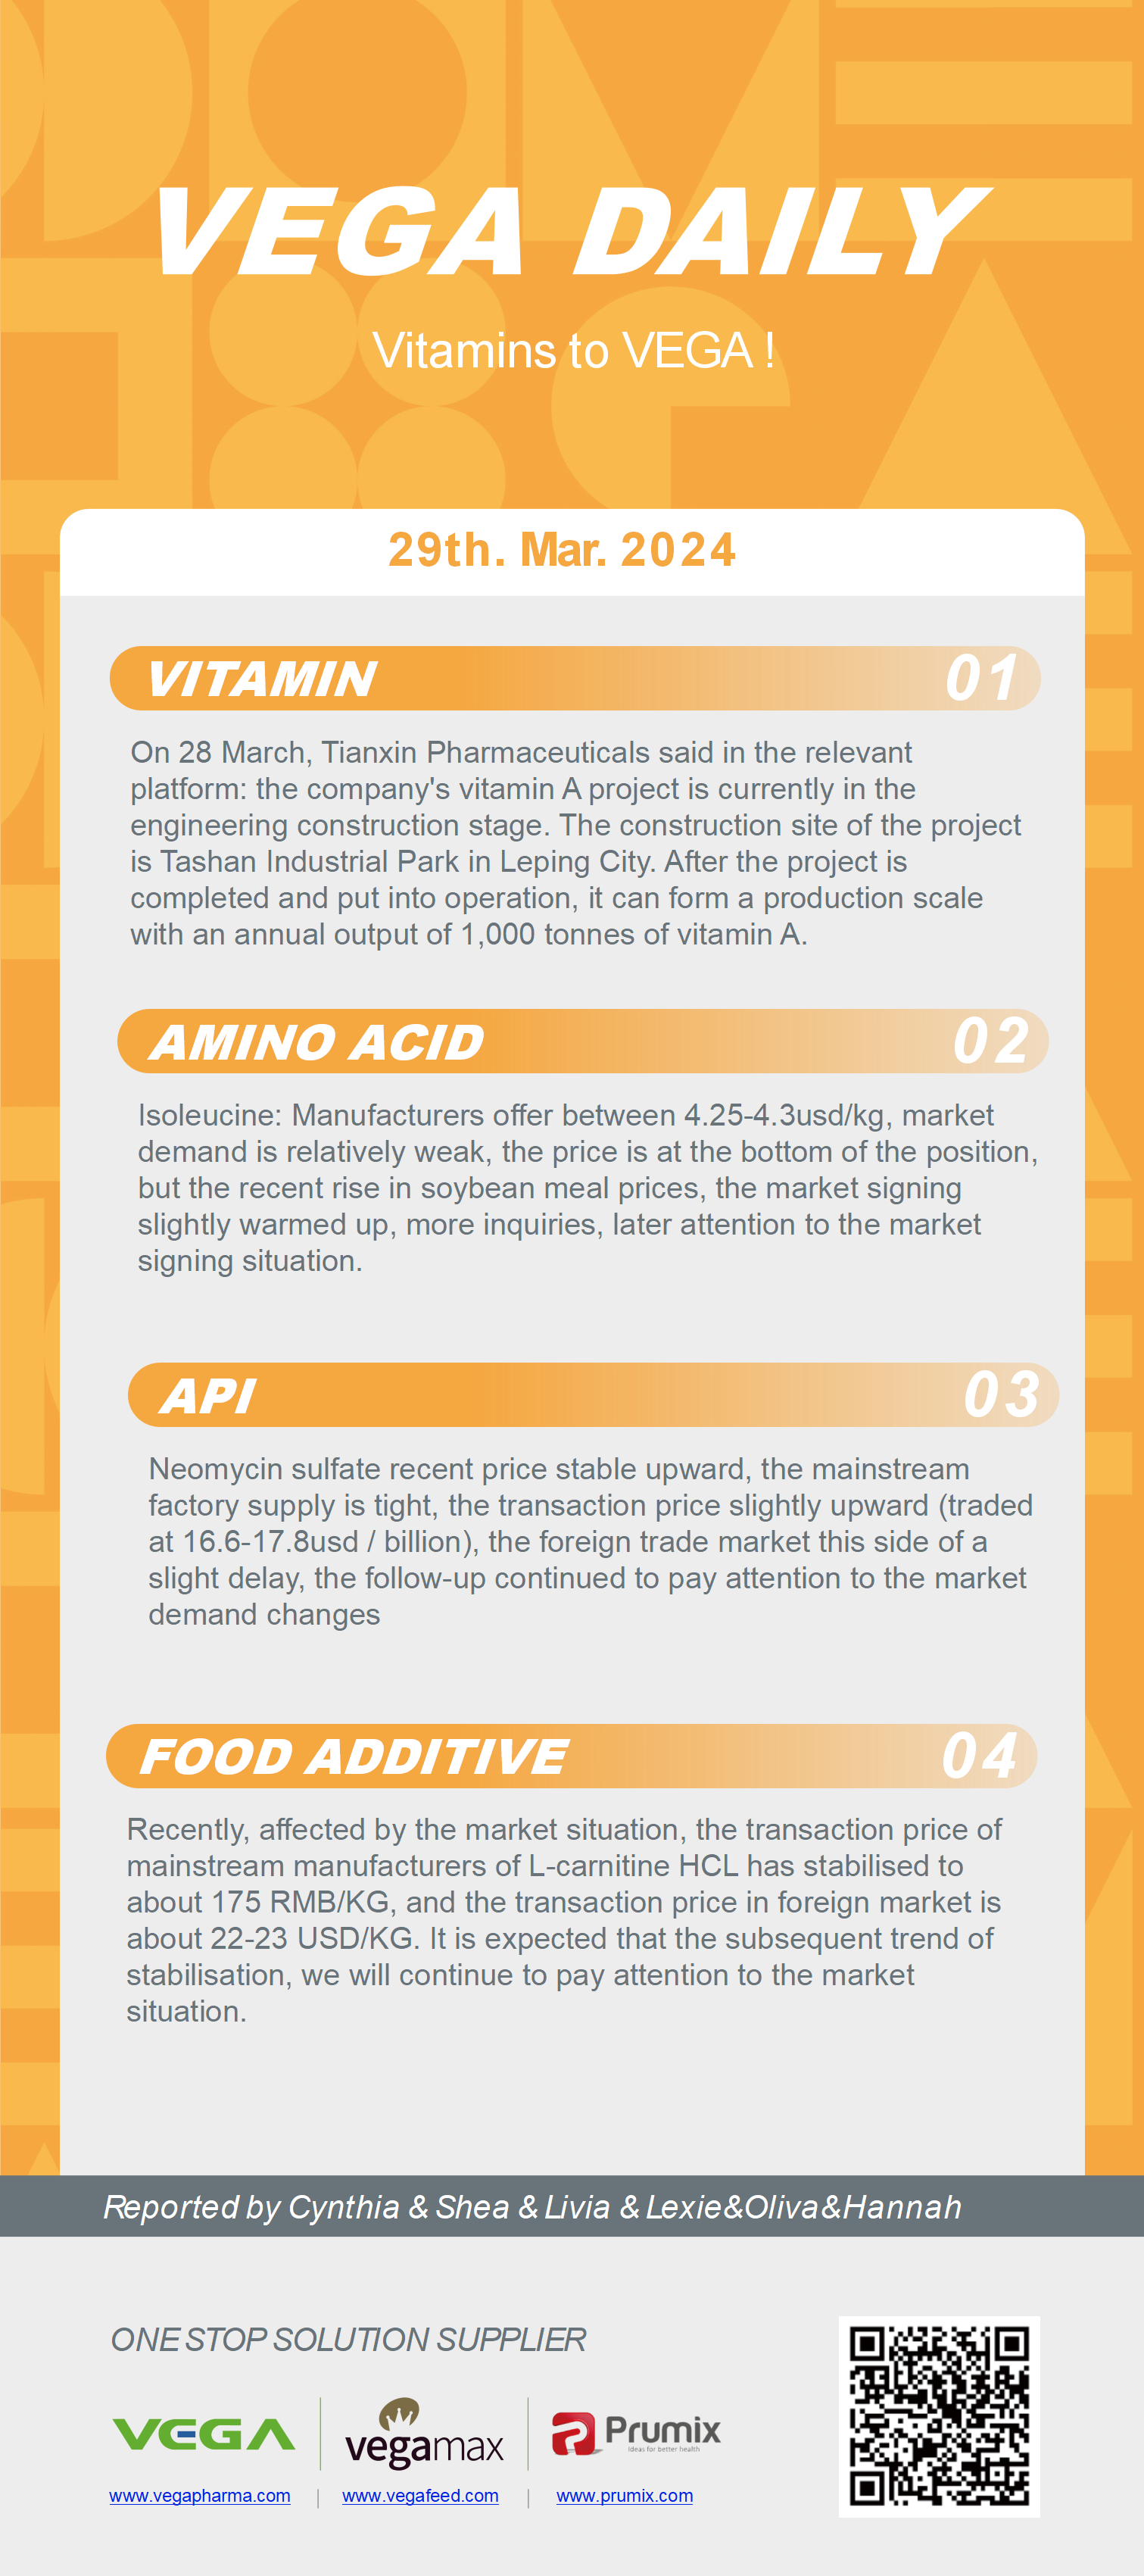 Vega Daily Dated on Mar 29th 2024 Vitamin Amino Acid APl Food Additives.png